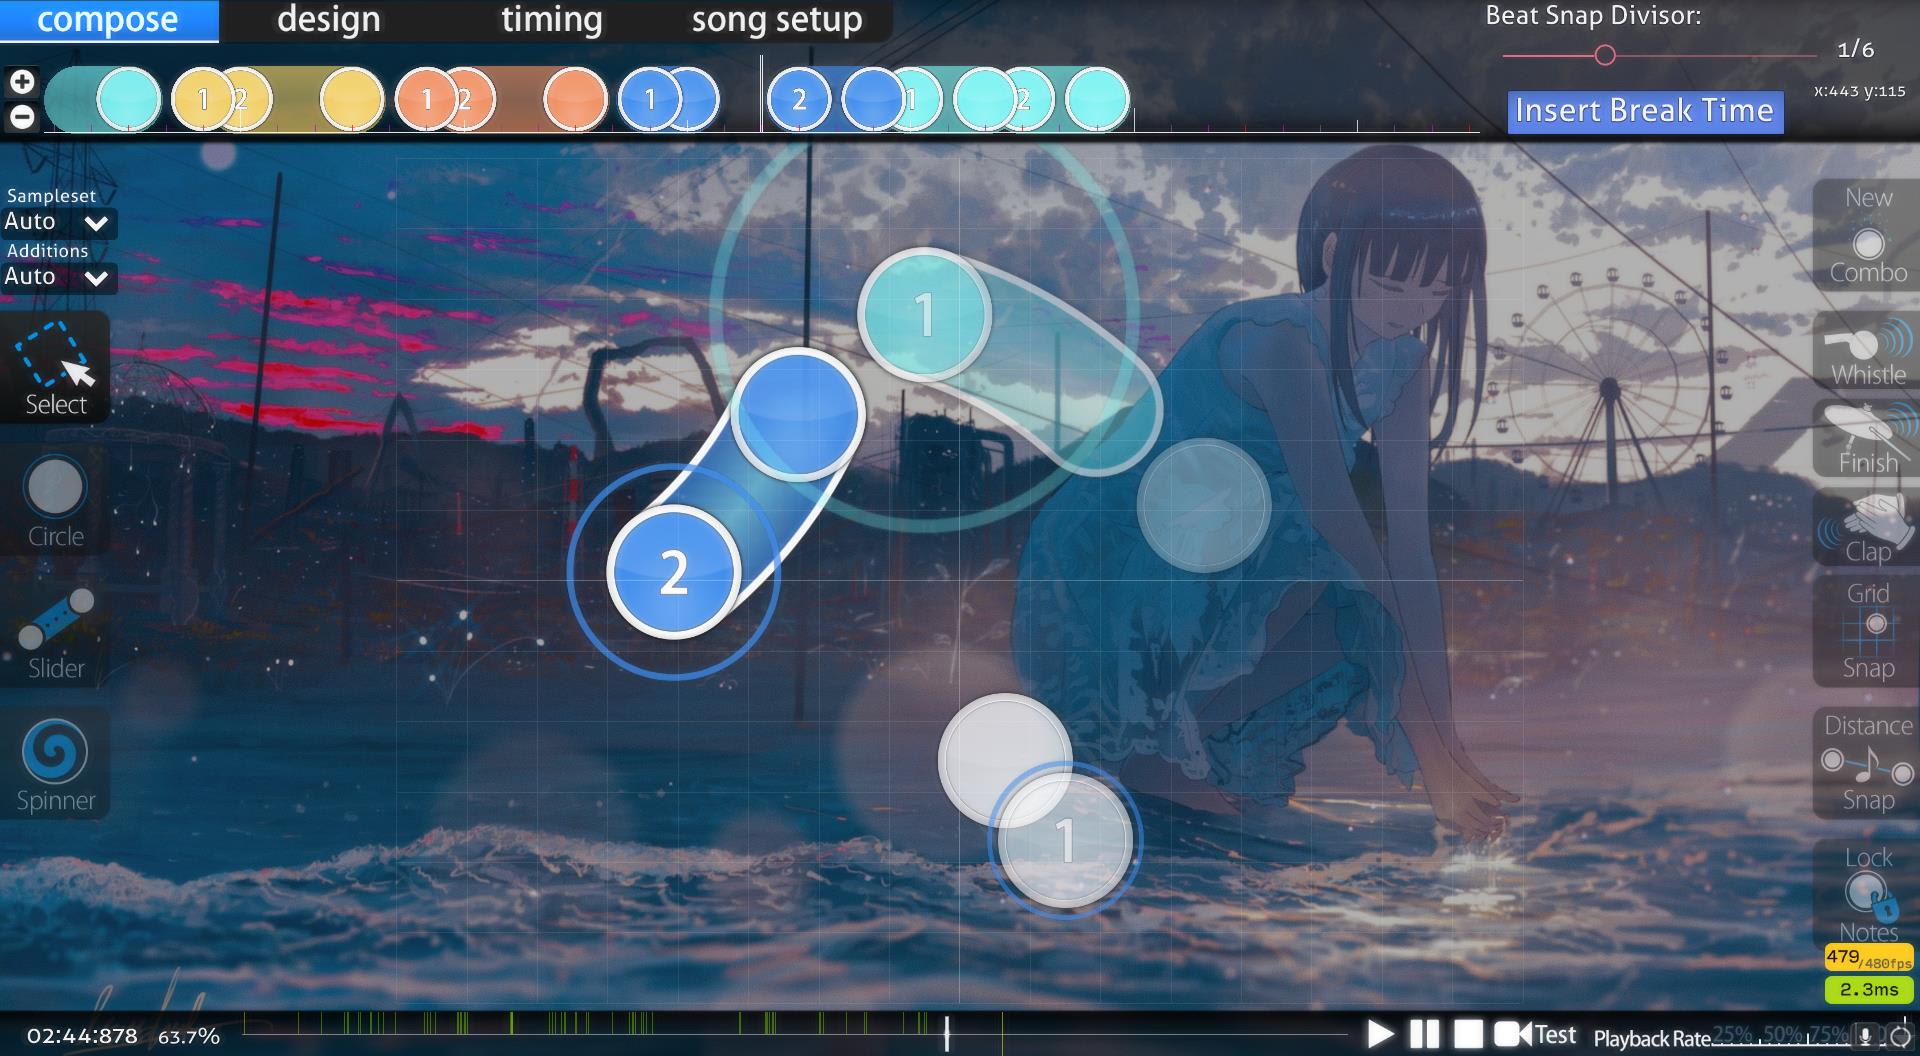 Create osu beatmaps for you by Acx2910